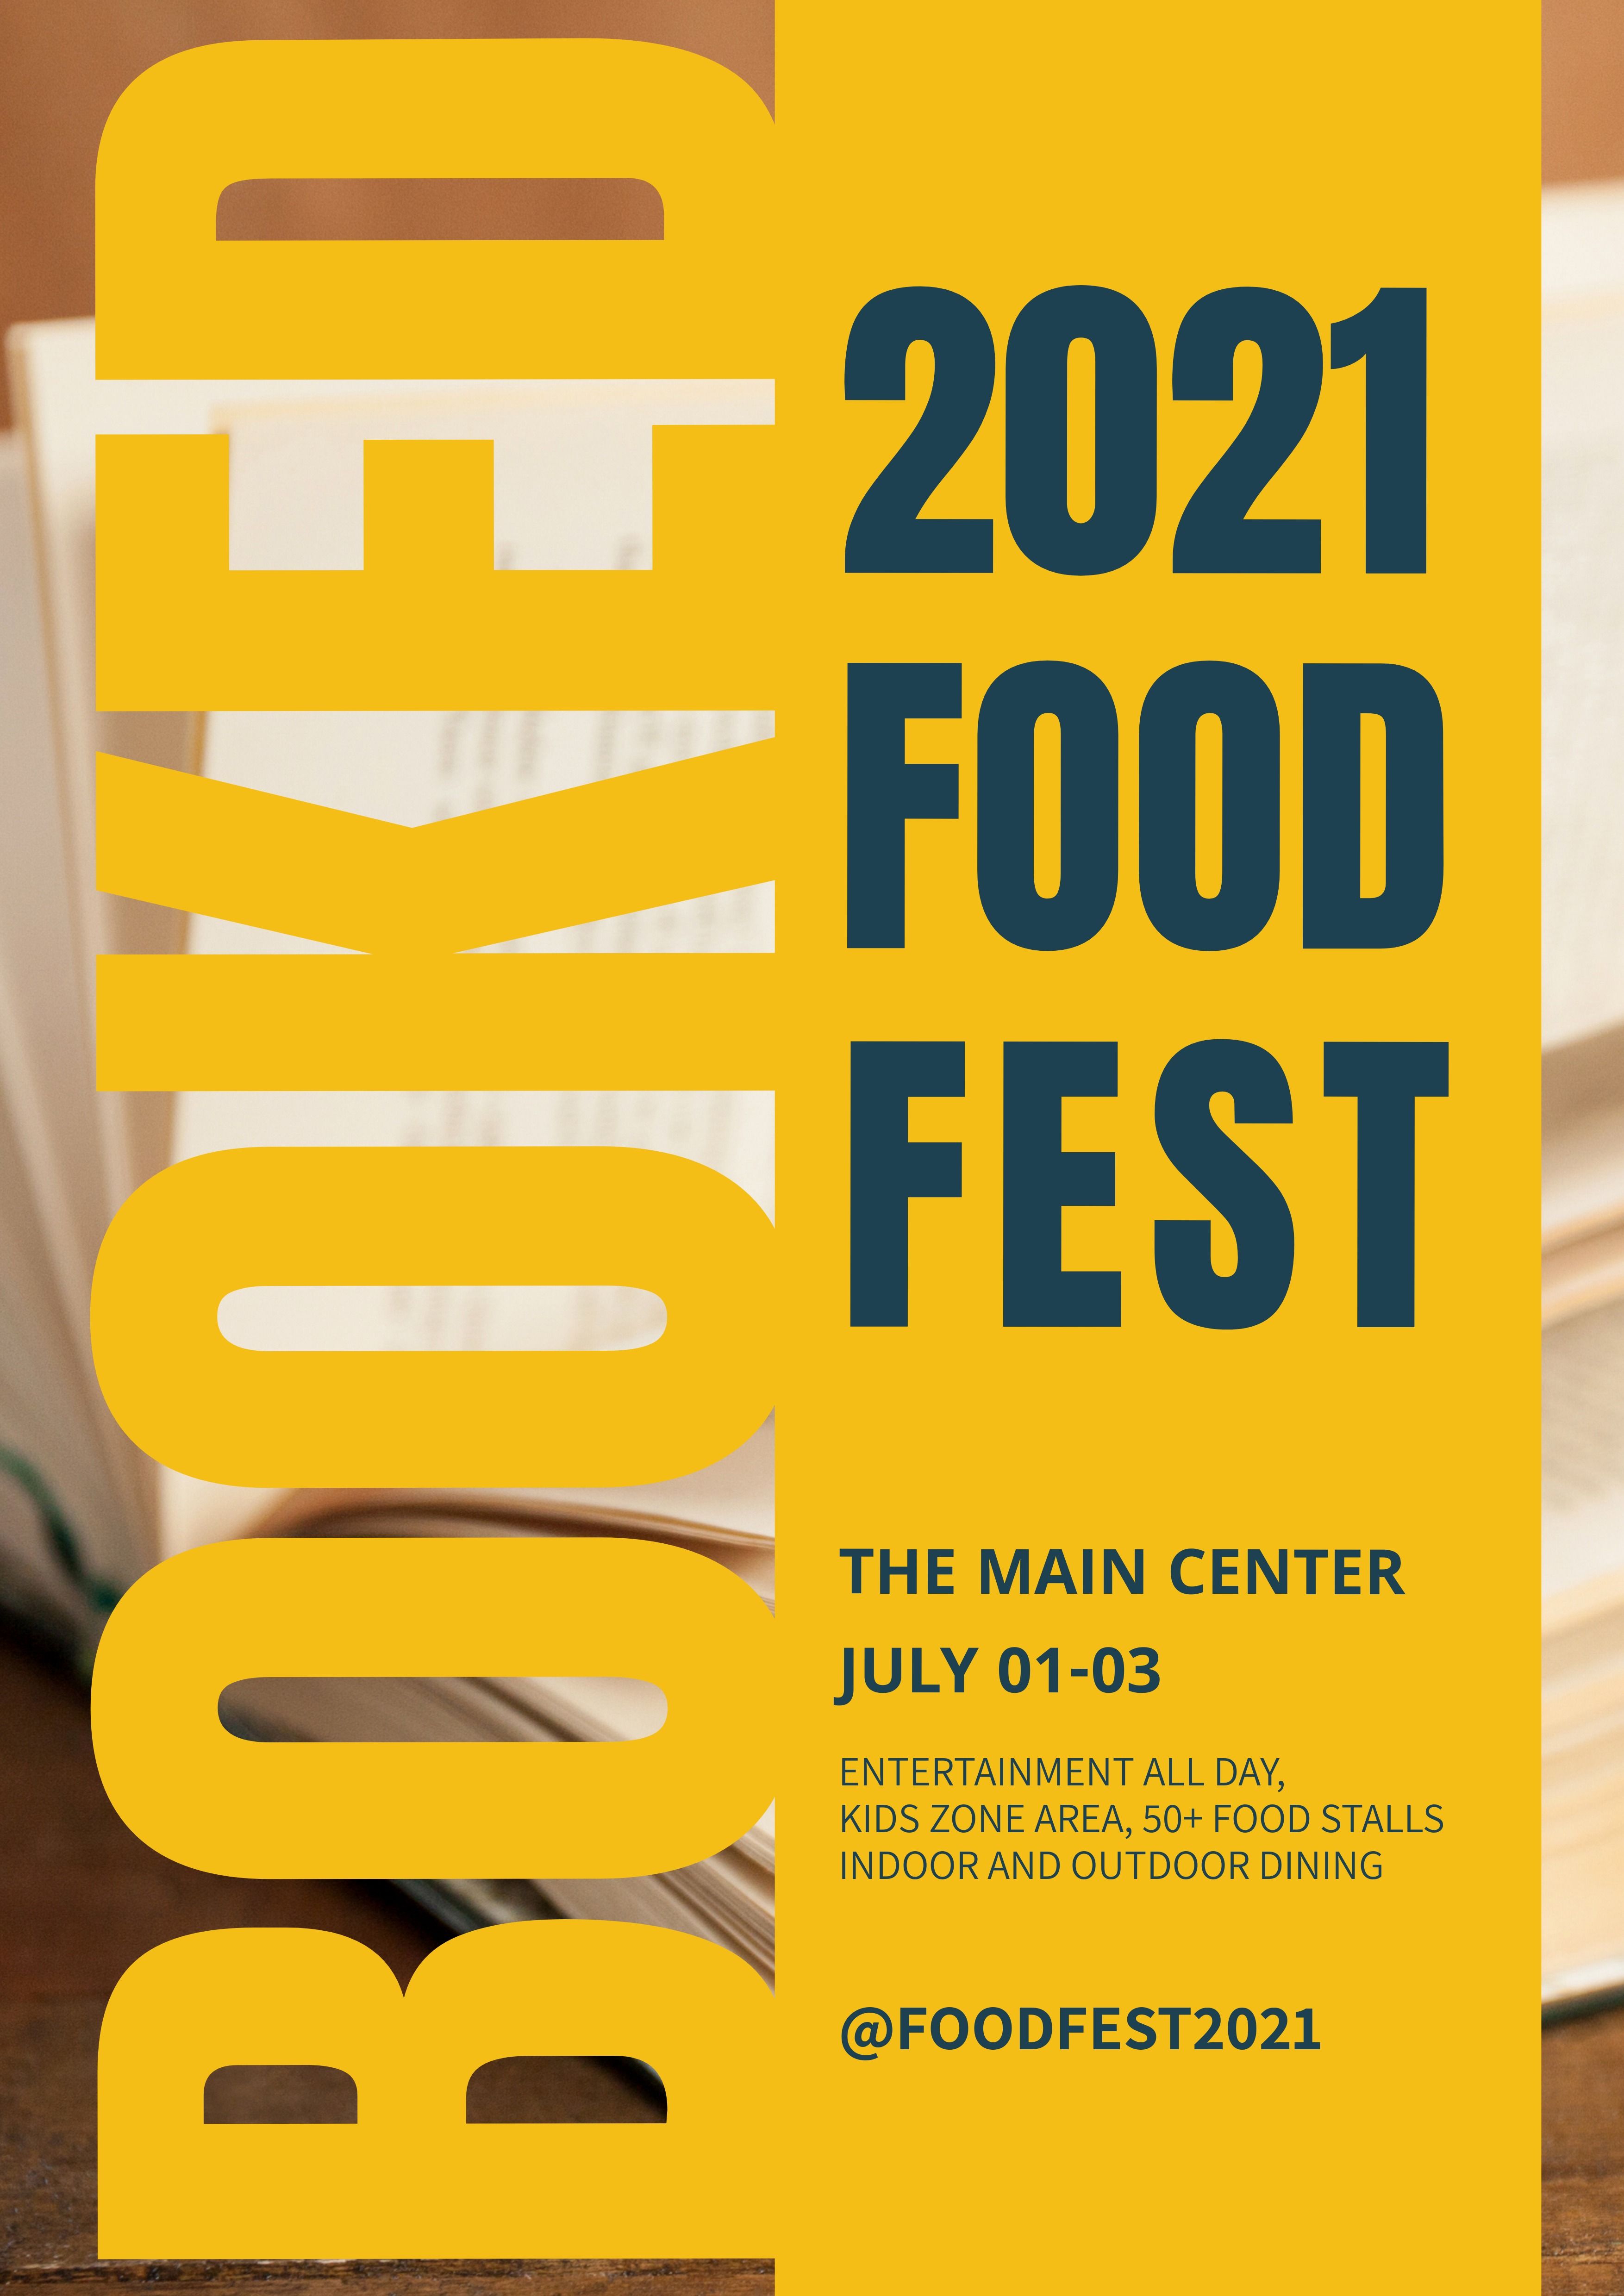 Event poster for food festival - 14 Creative poster ideas & design tips - Image